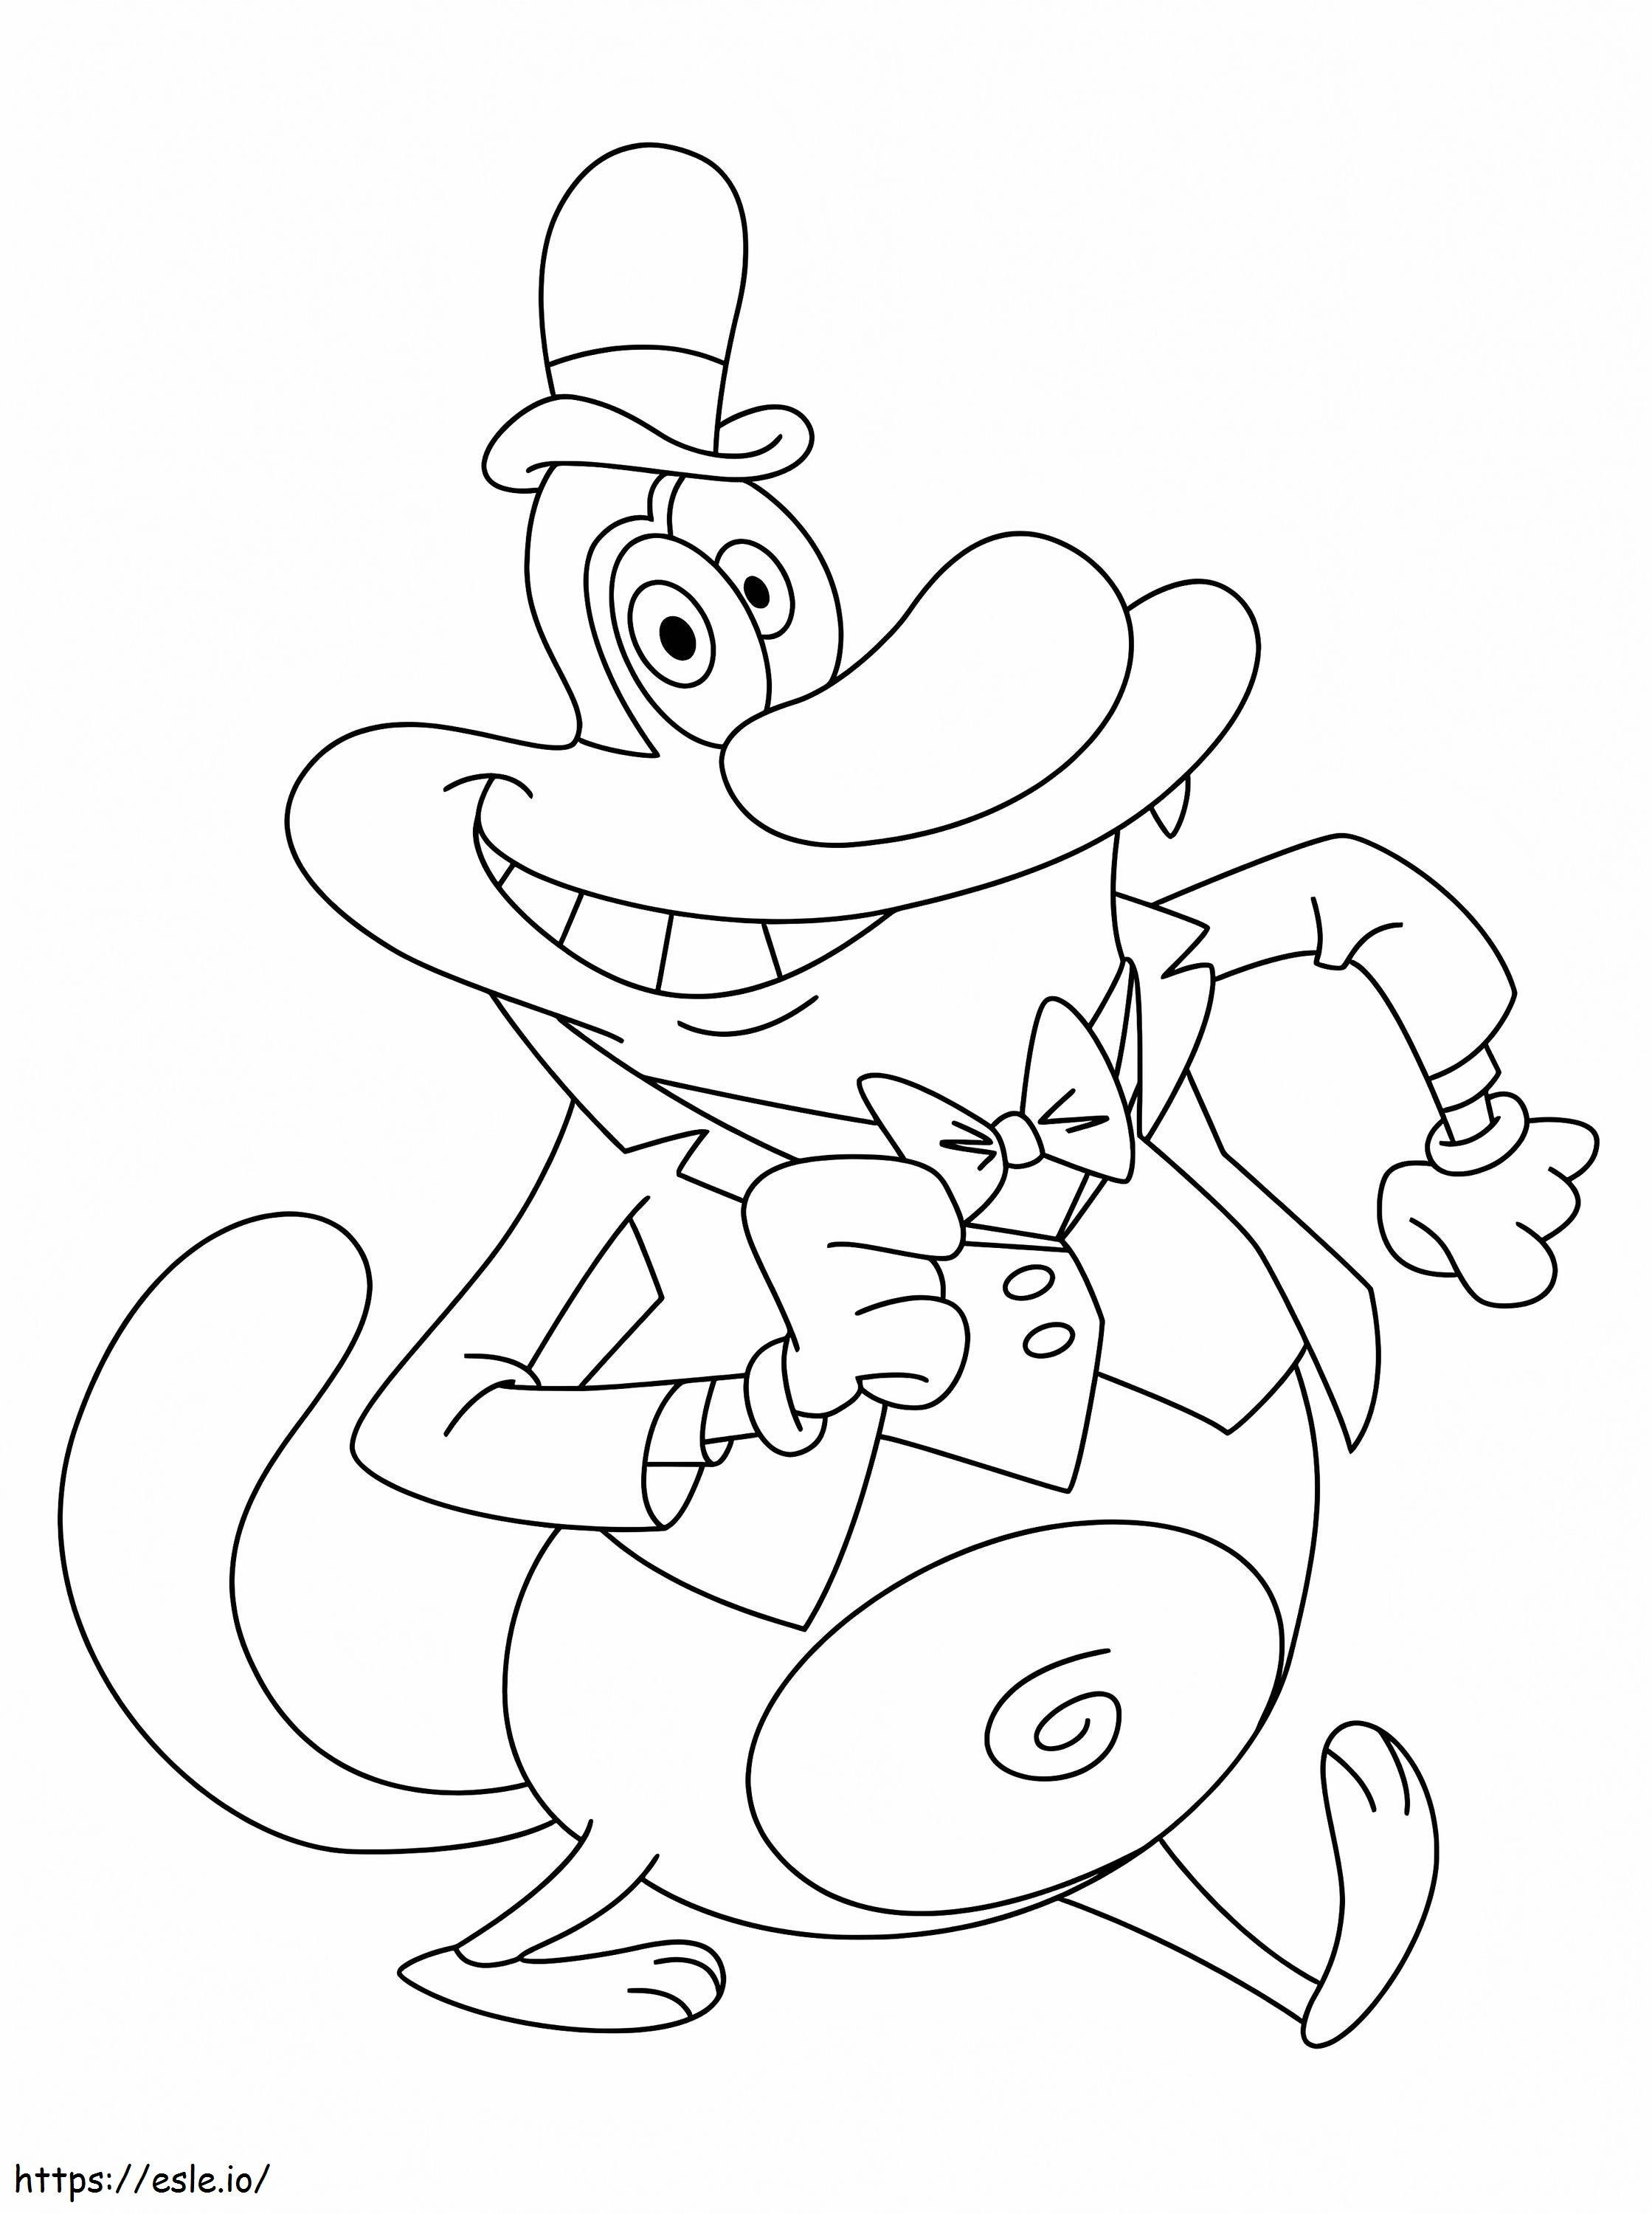 Coloring For Kids Oggy And The Cockroaches 55078 coloring page